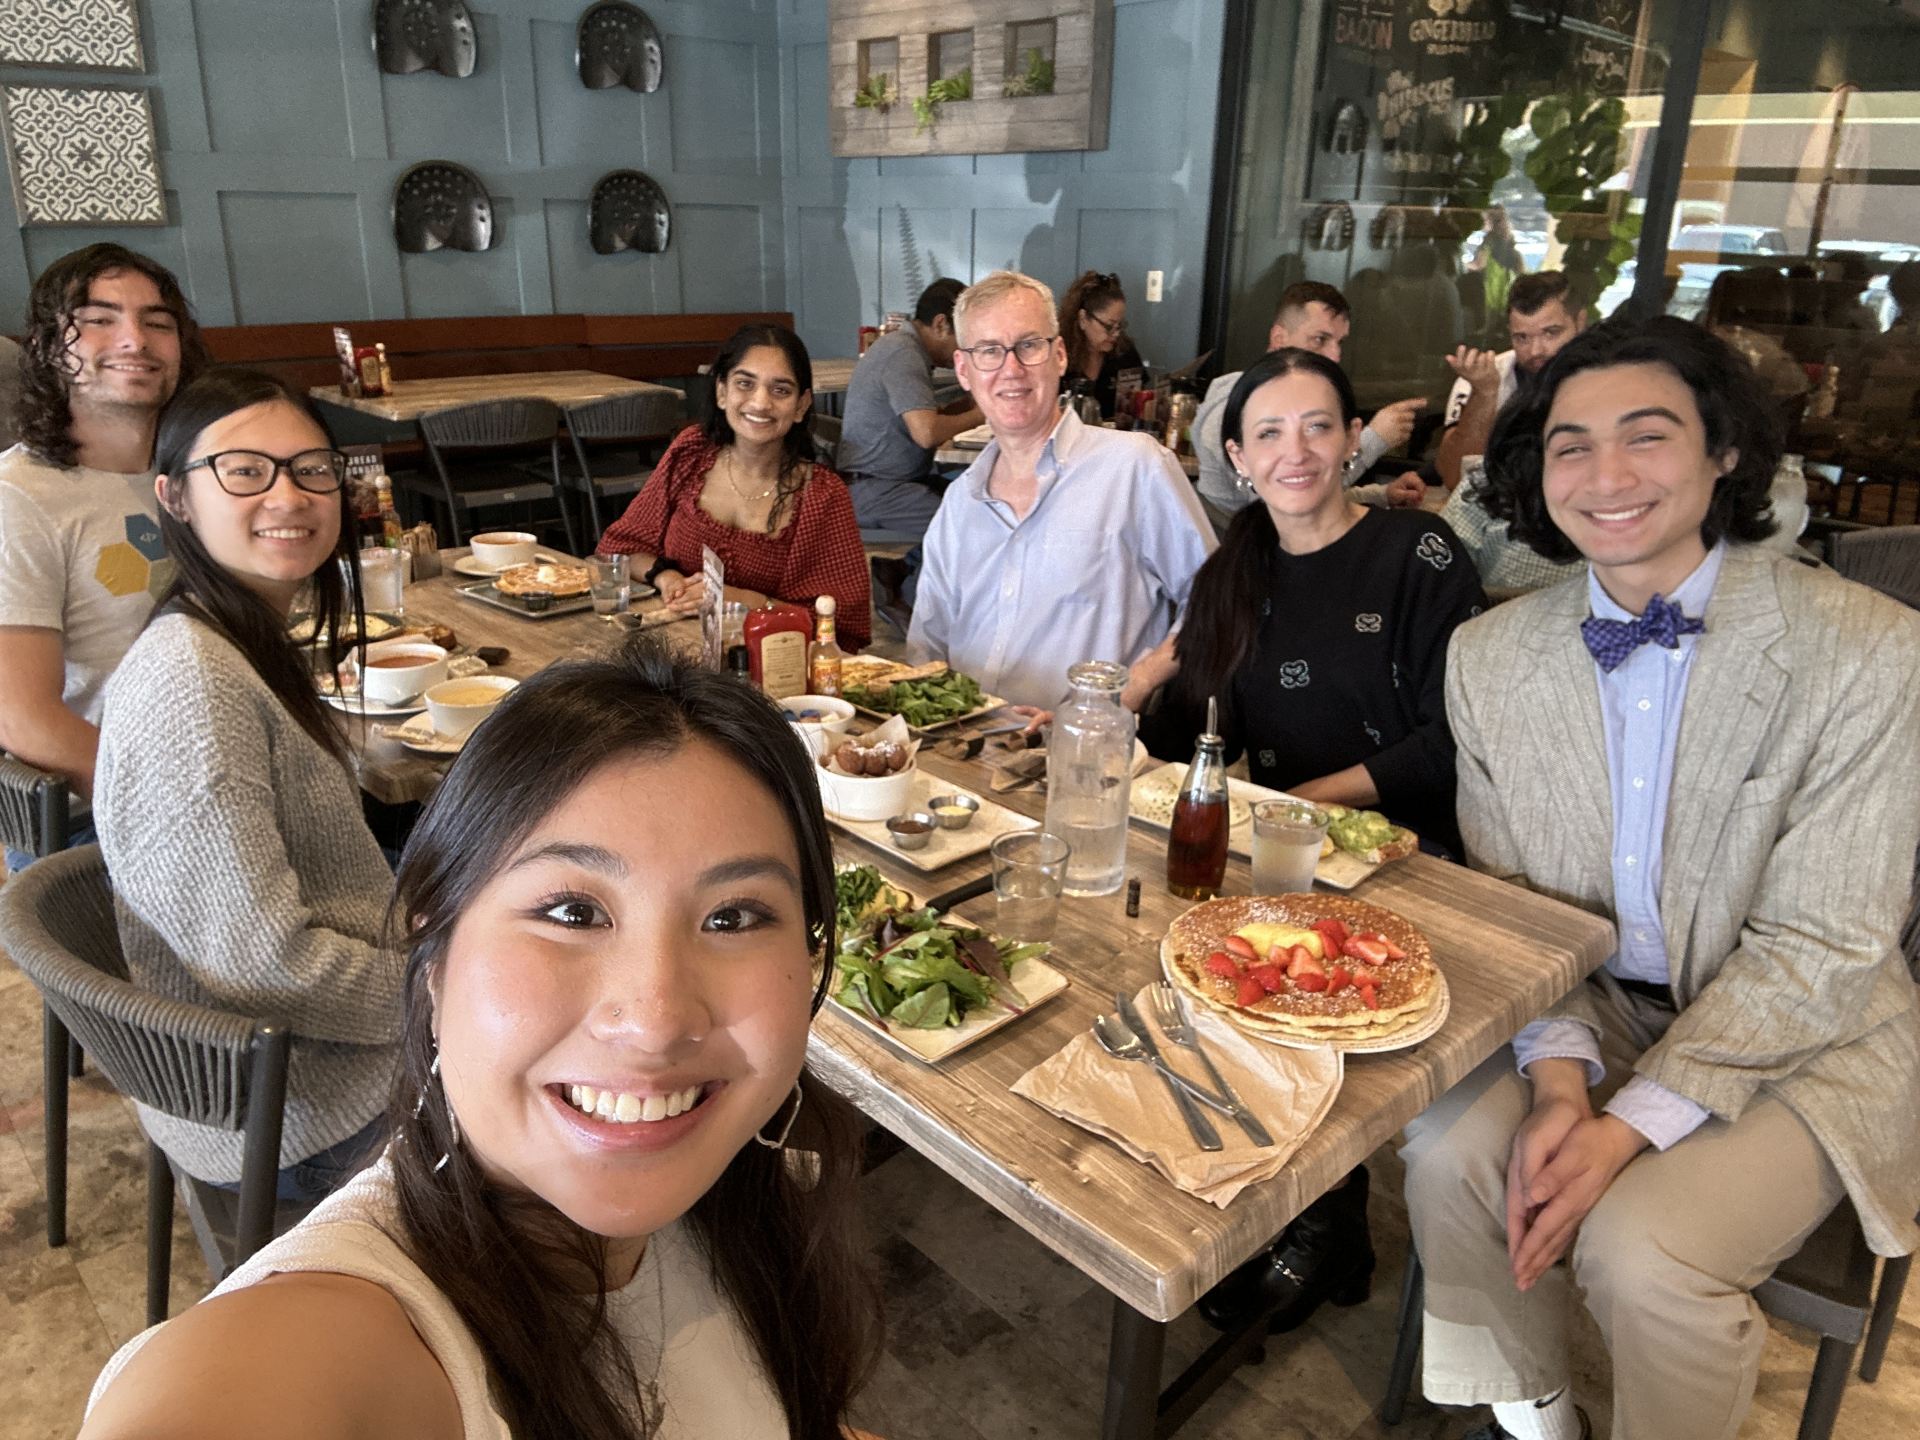 Mentoring relationships between faculty and students are part of the Honors College offerings. Clockwise around the table, starting with Alina Dam (holding camera): Lily Nguyen, Malcolm Hoffman, Chandu Garapaty, Michael Biewer and his wife Mihaela Stefan (both faculty), Charles Birt.